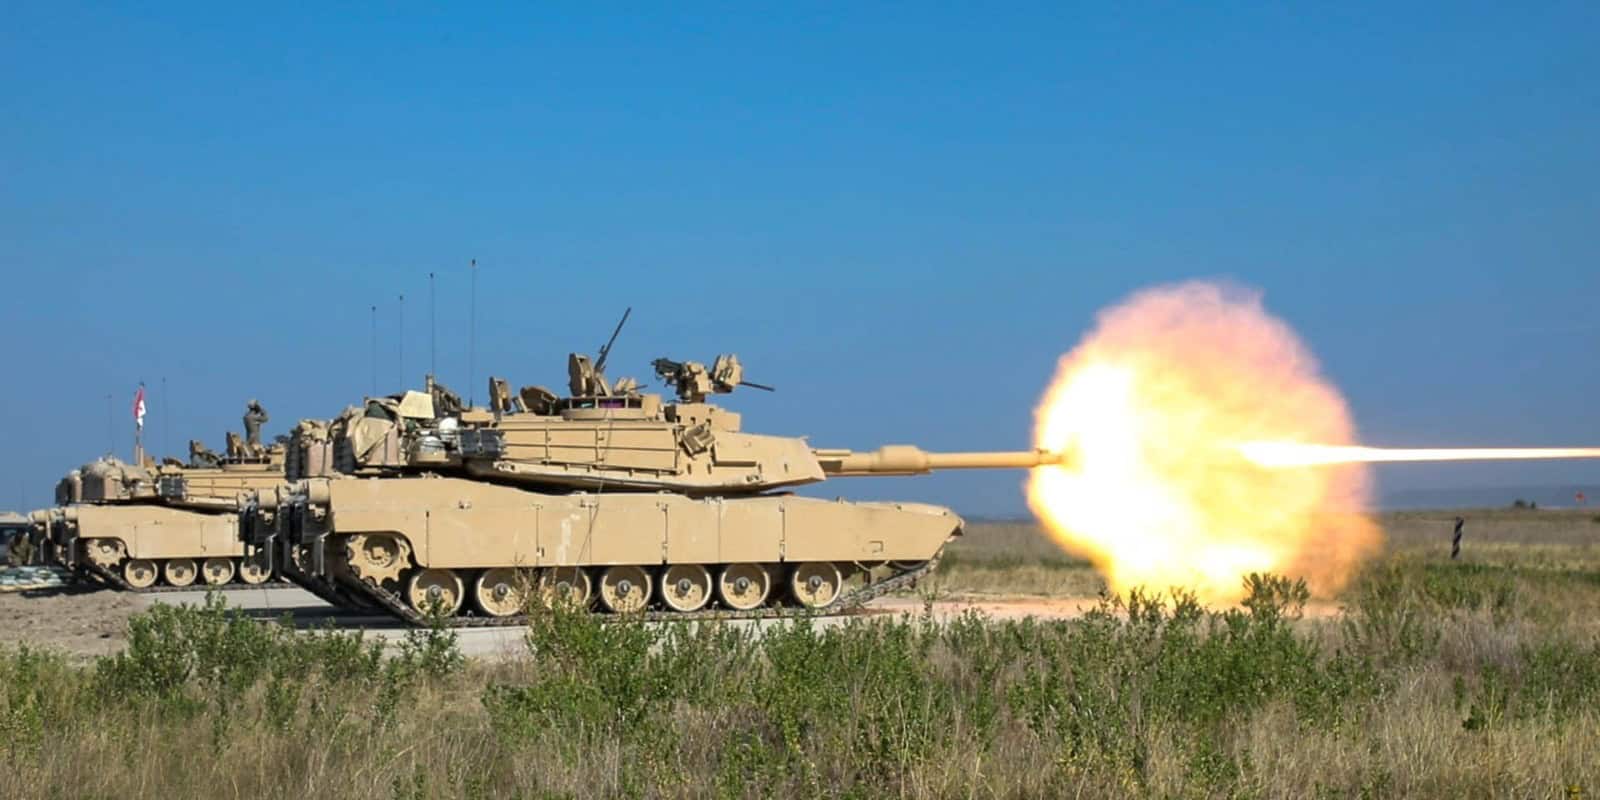 The Track Record of M1 Abrams Speaks for Itself